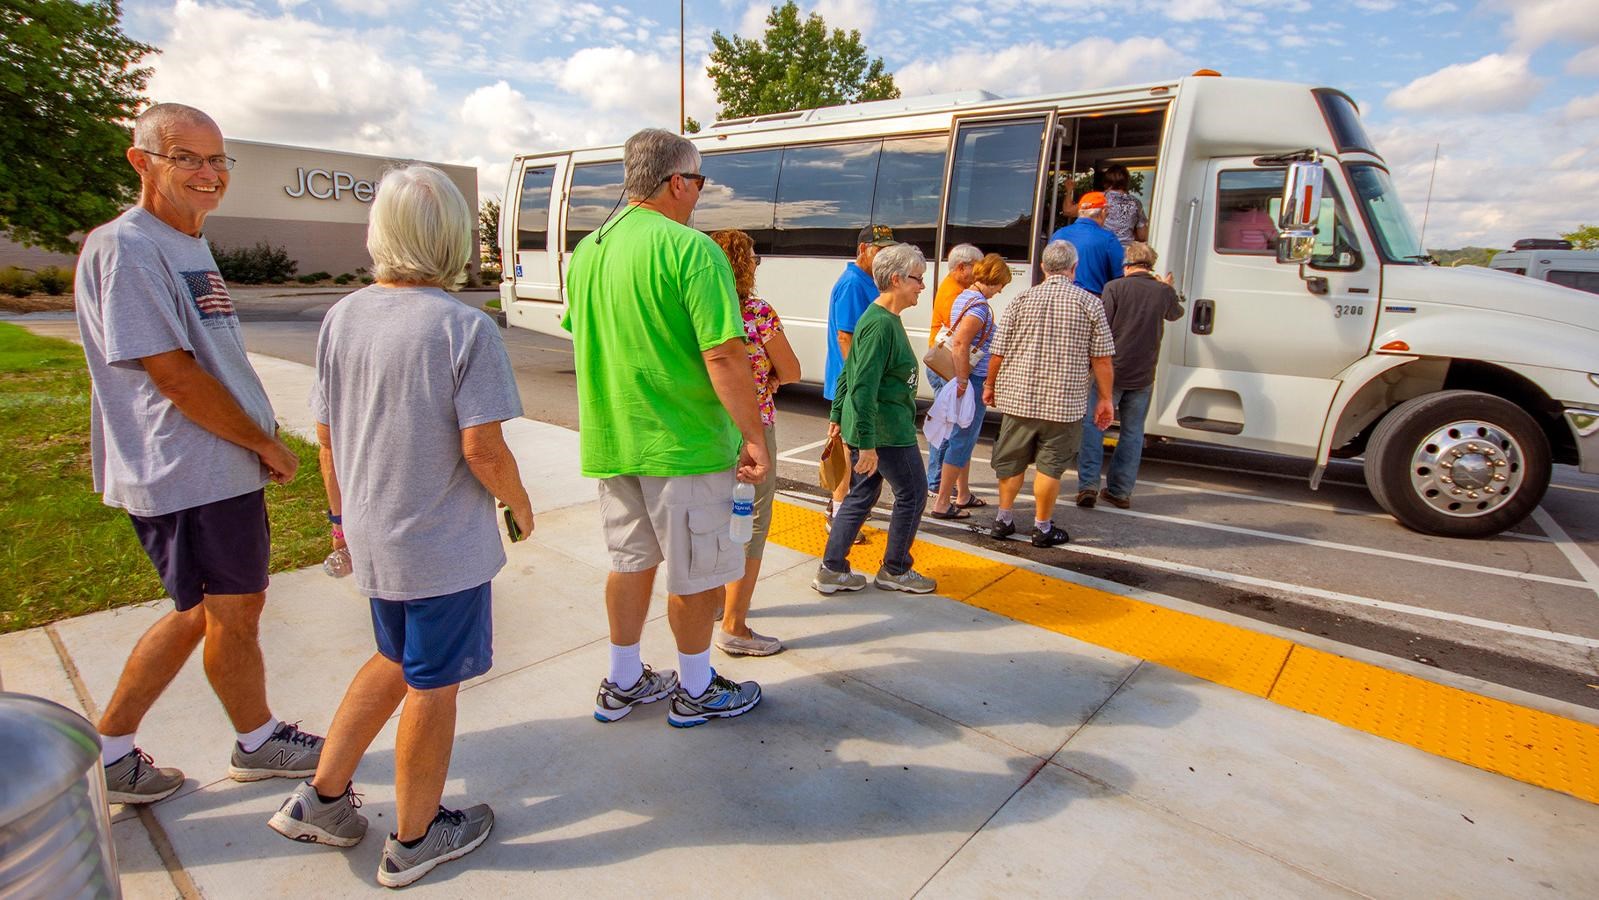 Several people boarding a small bus.